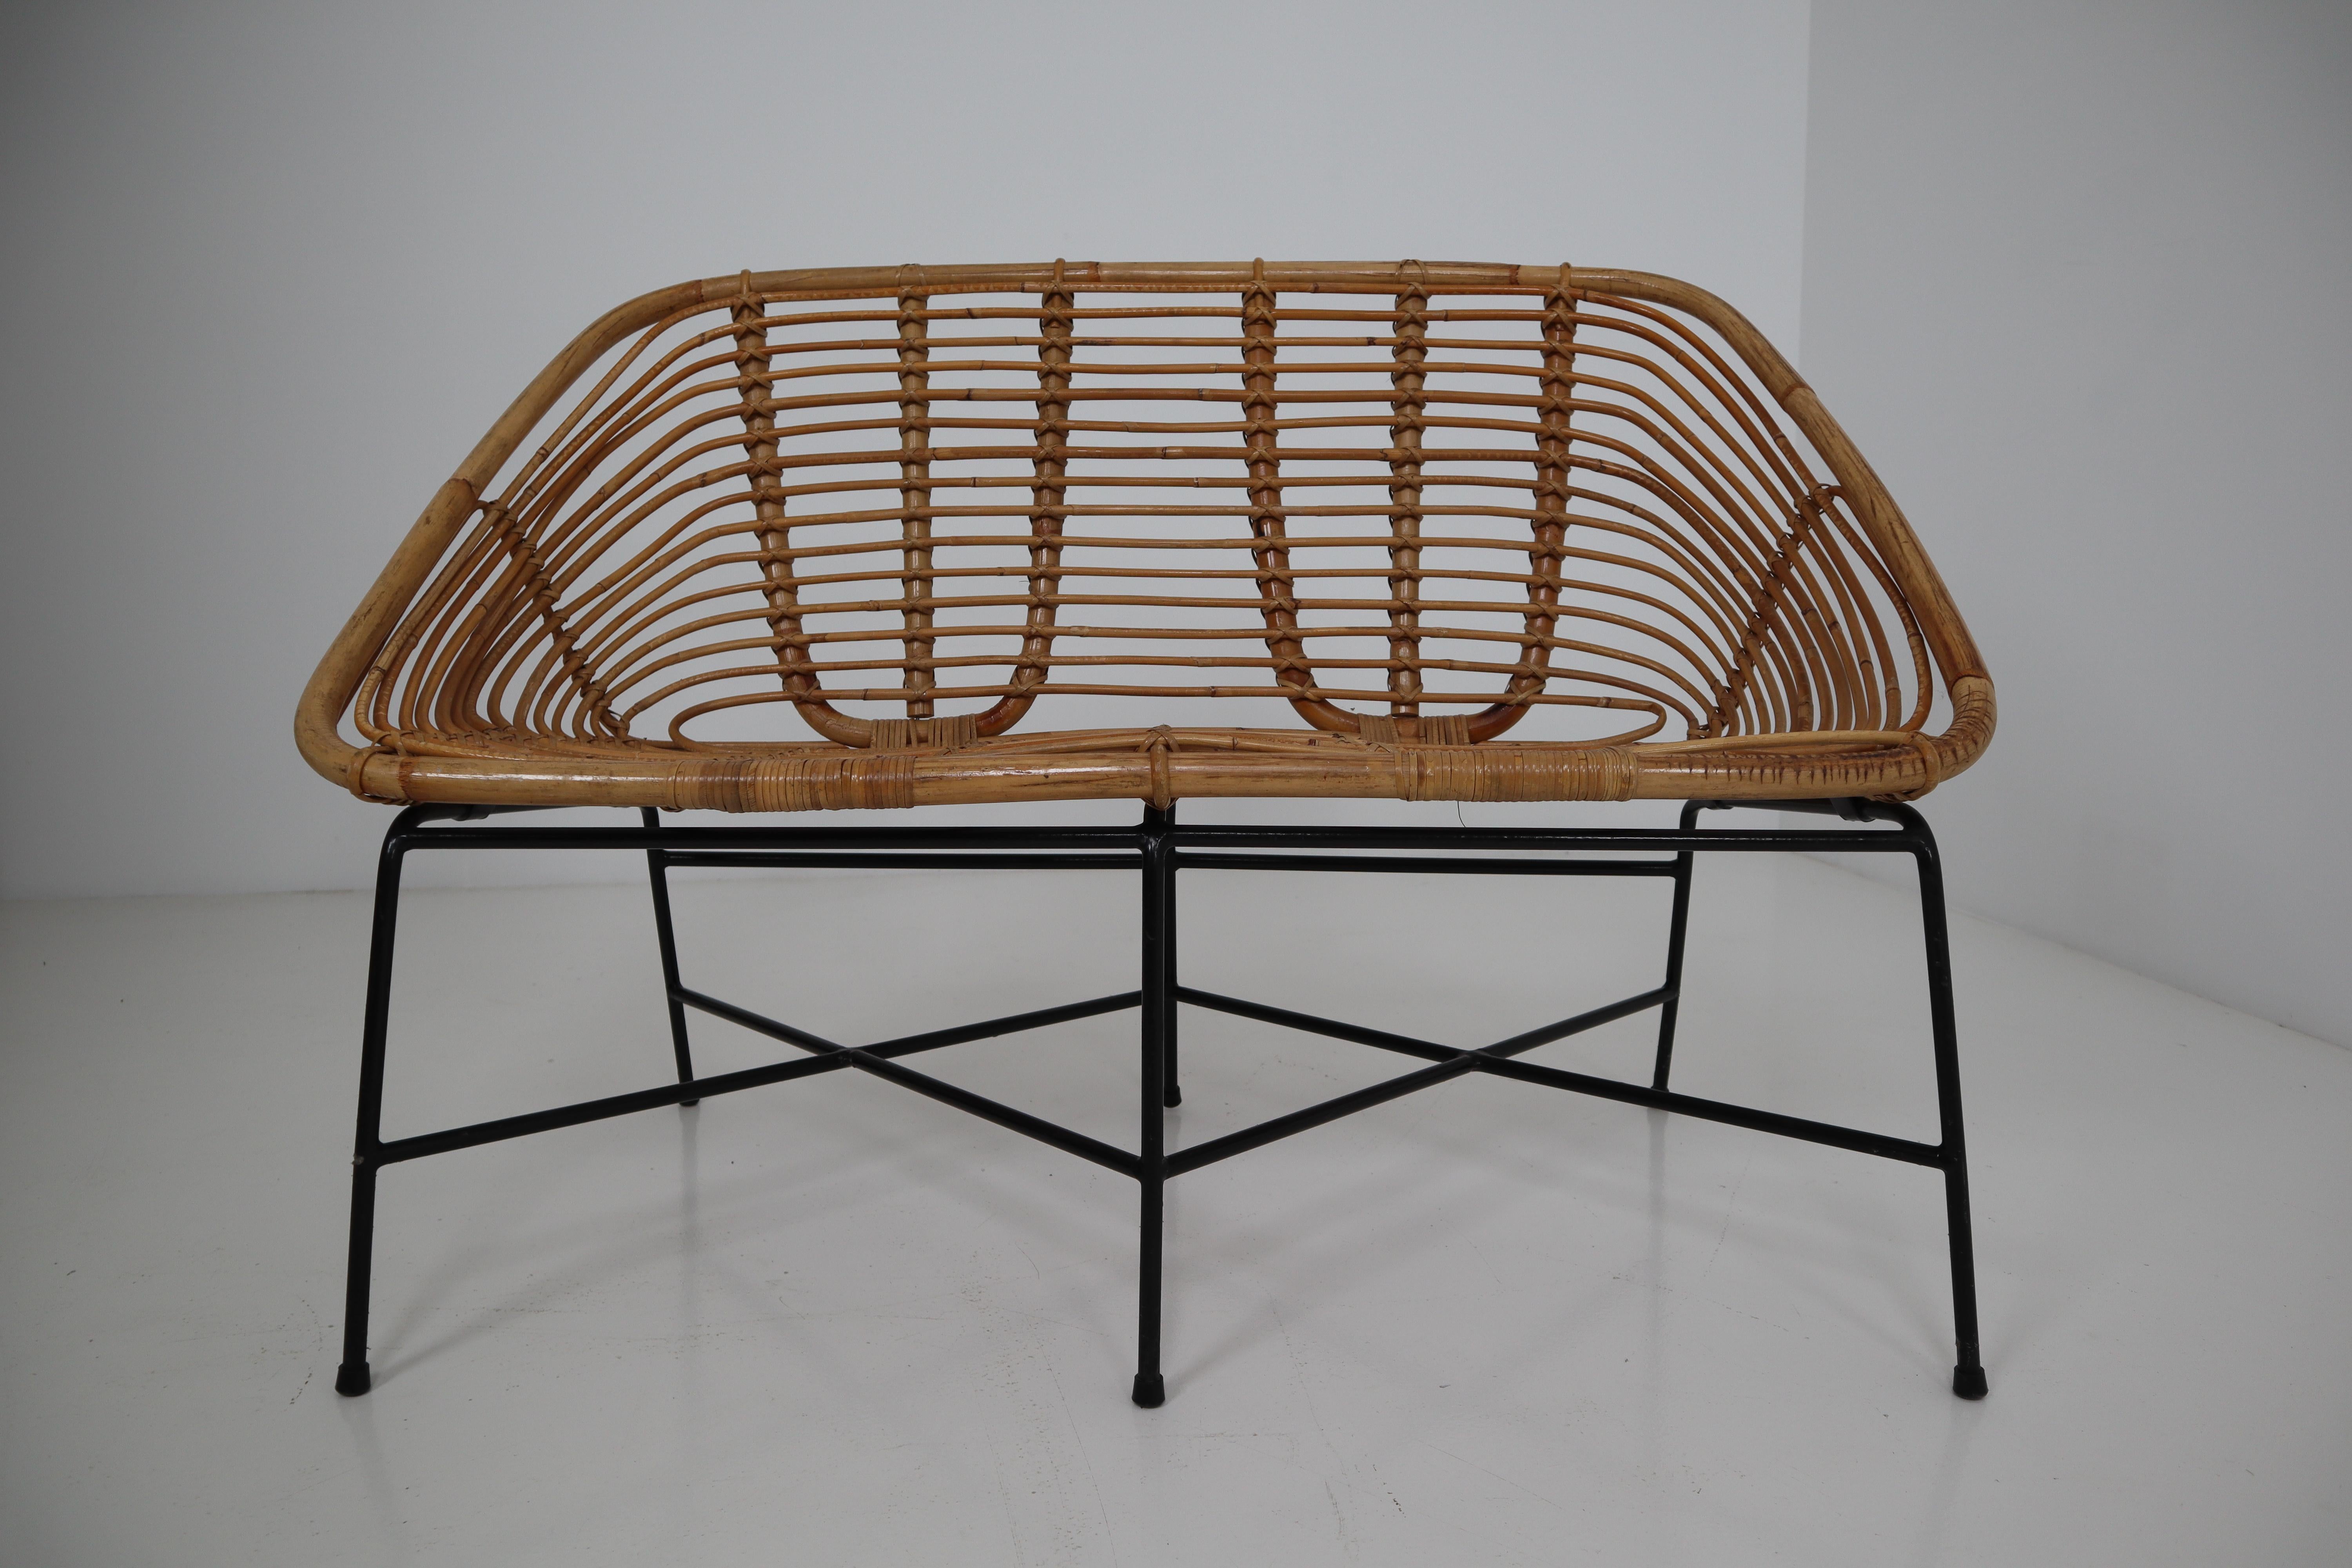 Elegant Italian rattan, wicker and iron settee. Rattan in excellent condition. The frame is made of black lacquered steel. They are comfortable to sit in and create an inviting sitting experience. In very good vintage condition with light wear and